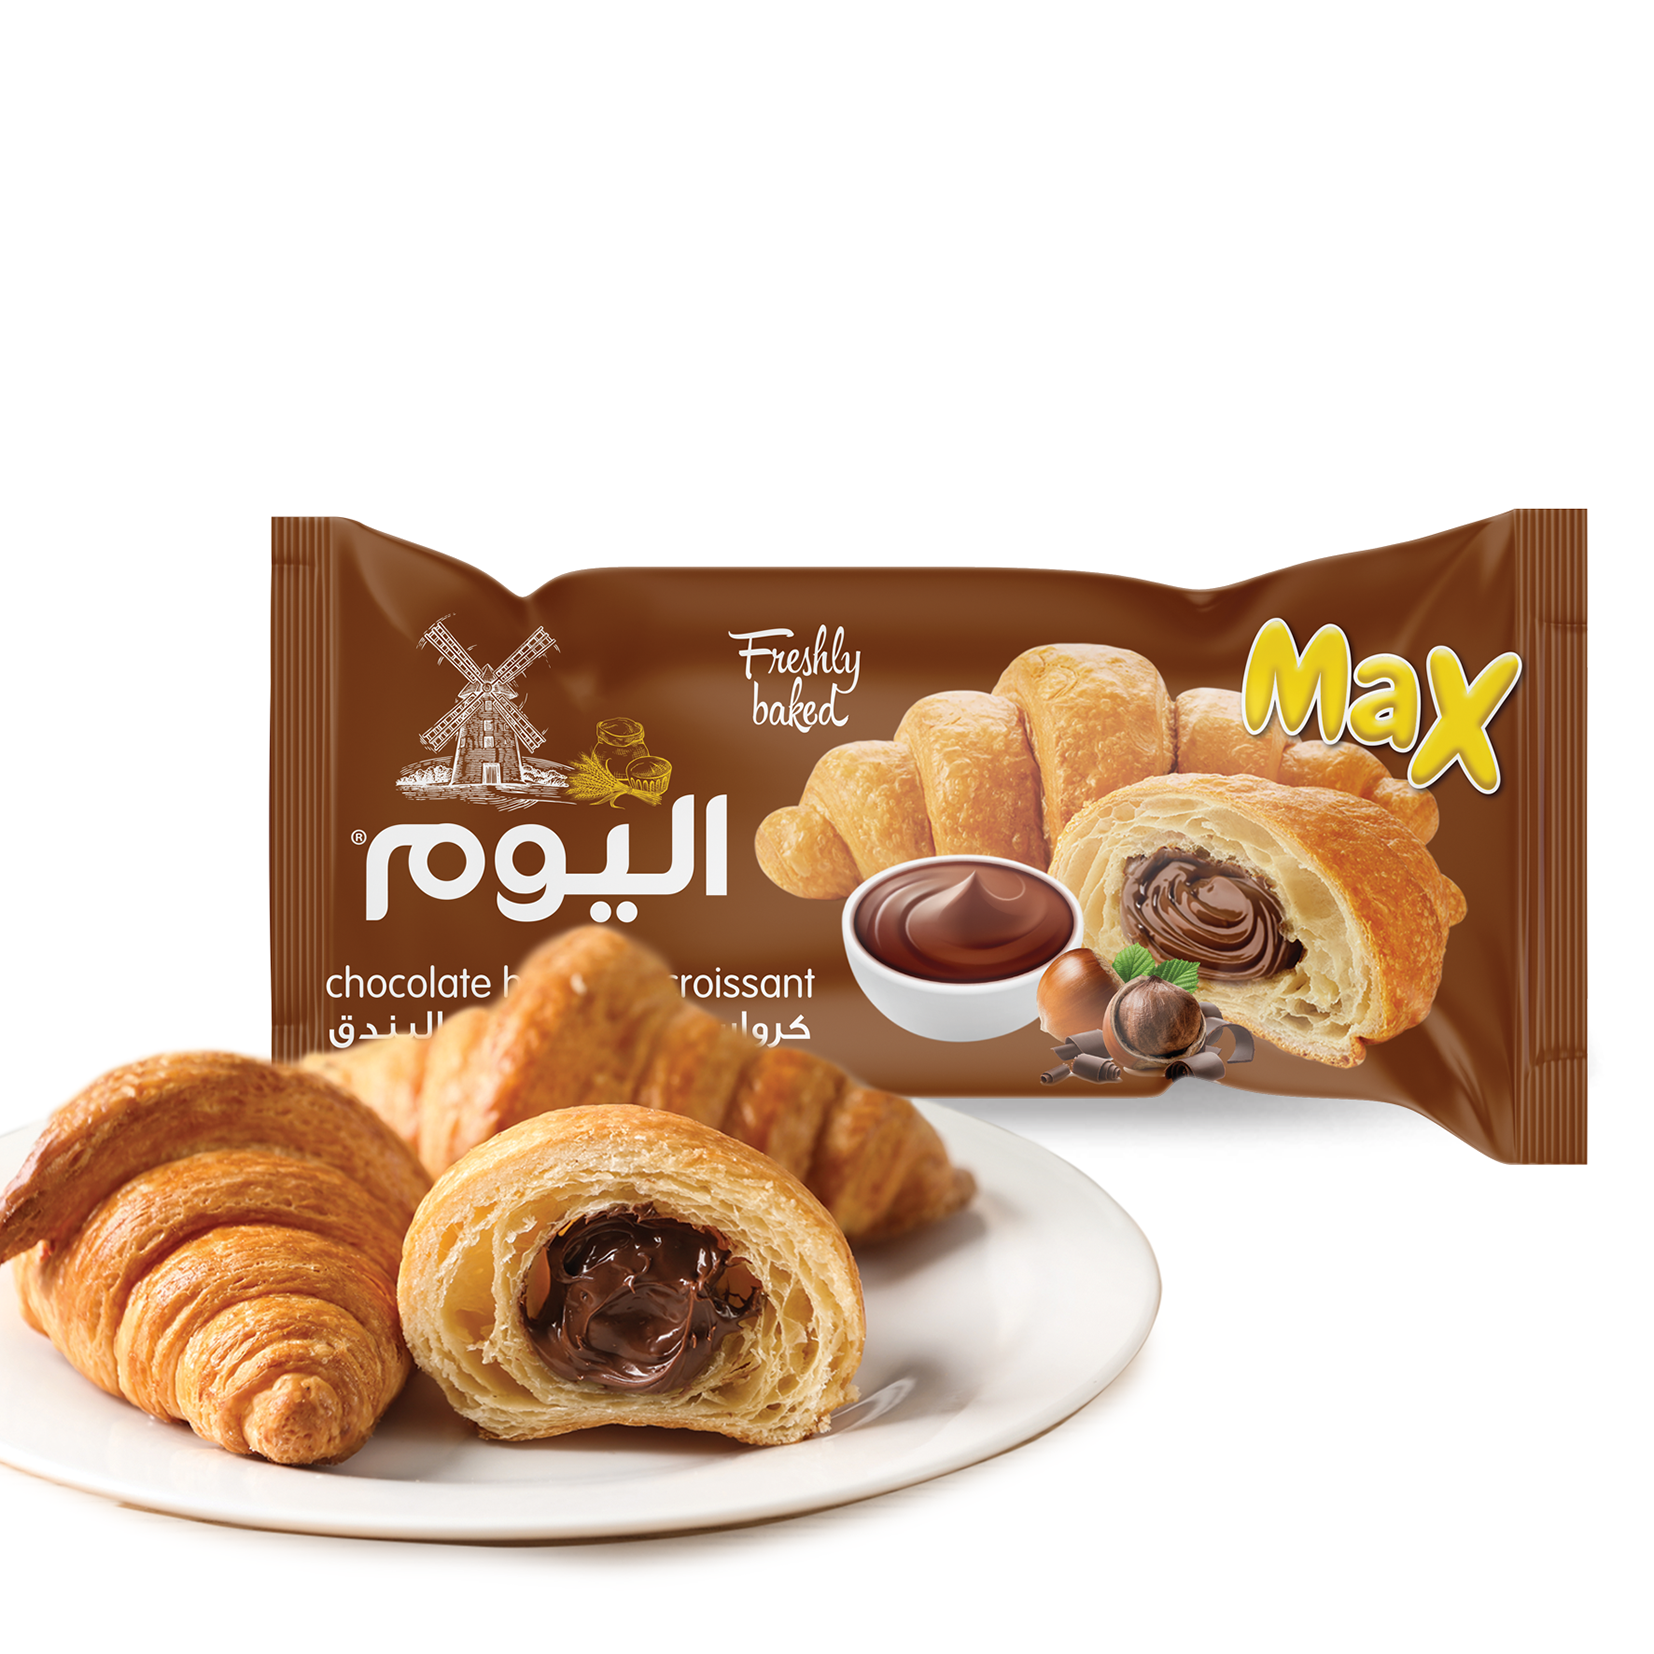 CROISSANT PRODUCT CATEGORY